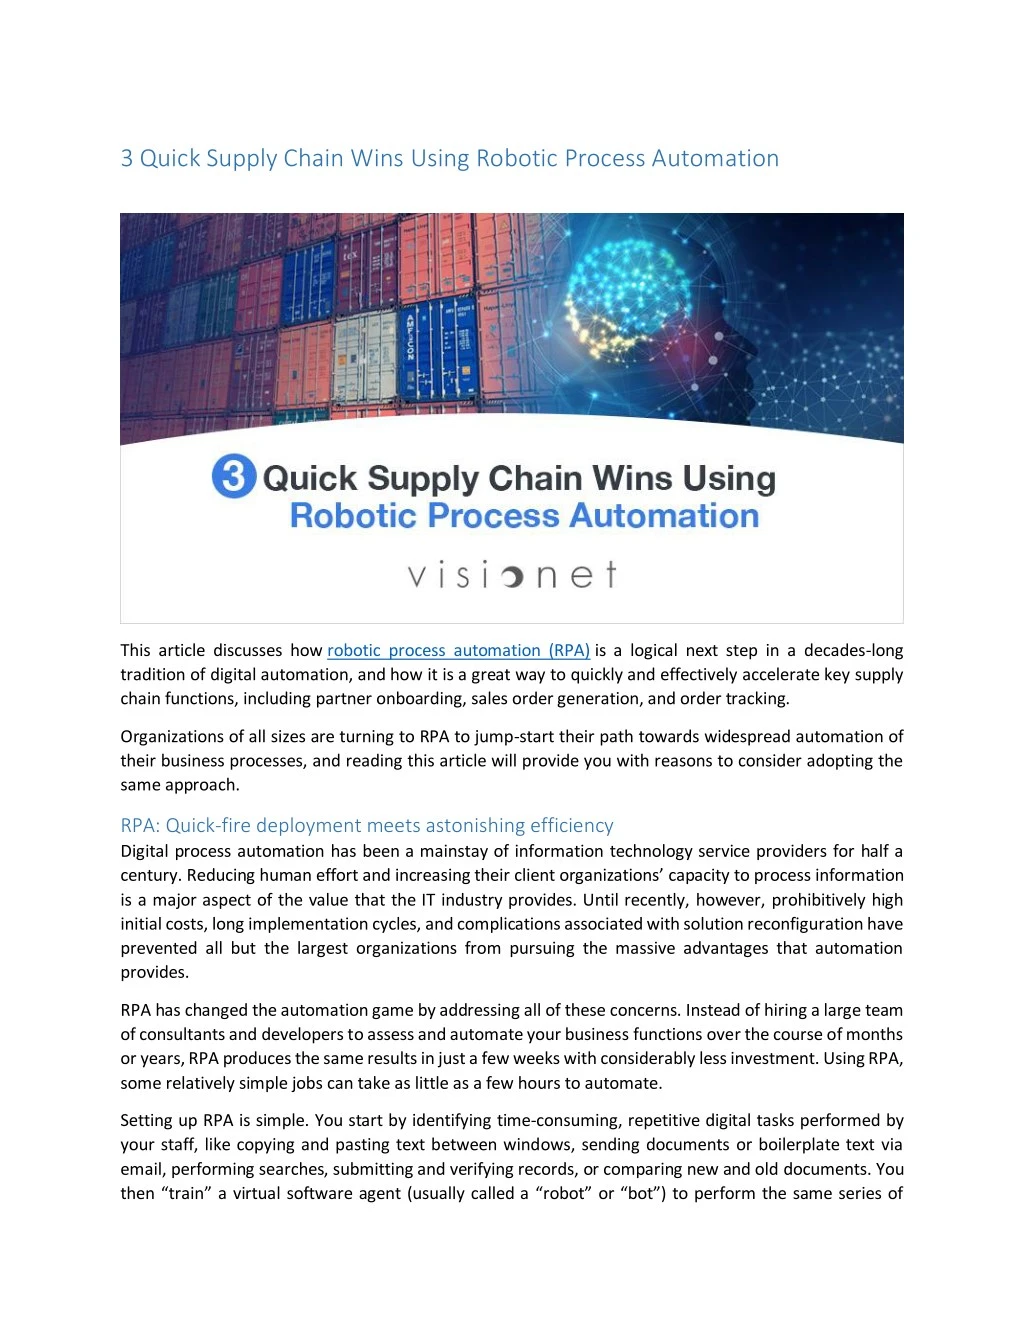 3 quick supply chain wins using robotic process